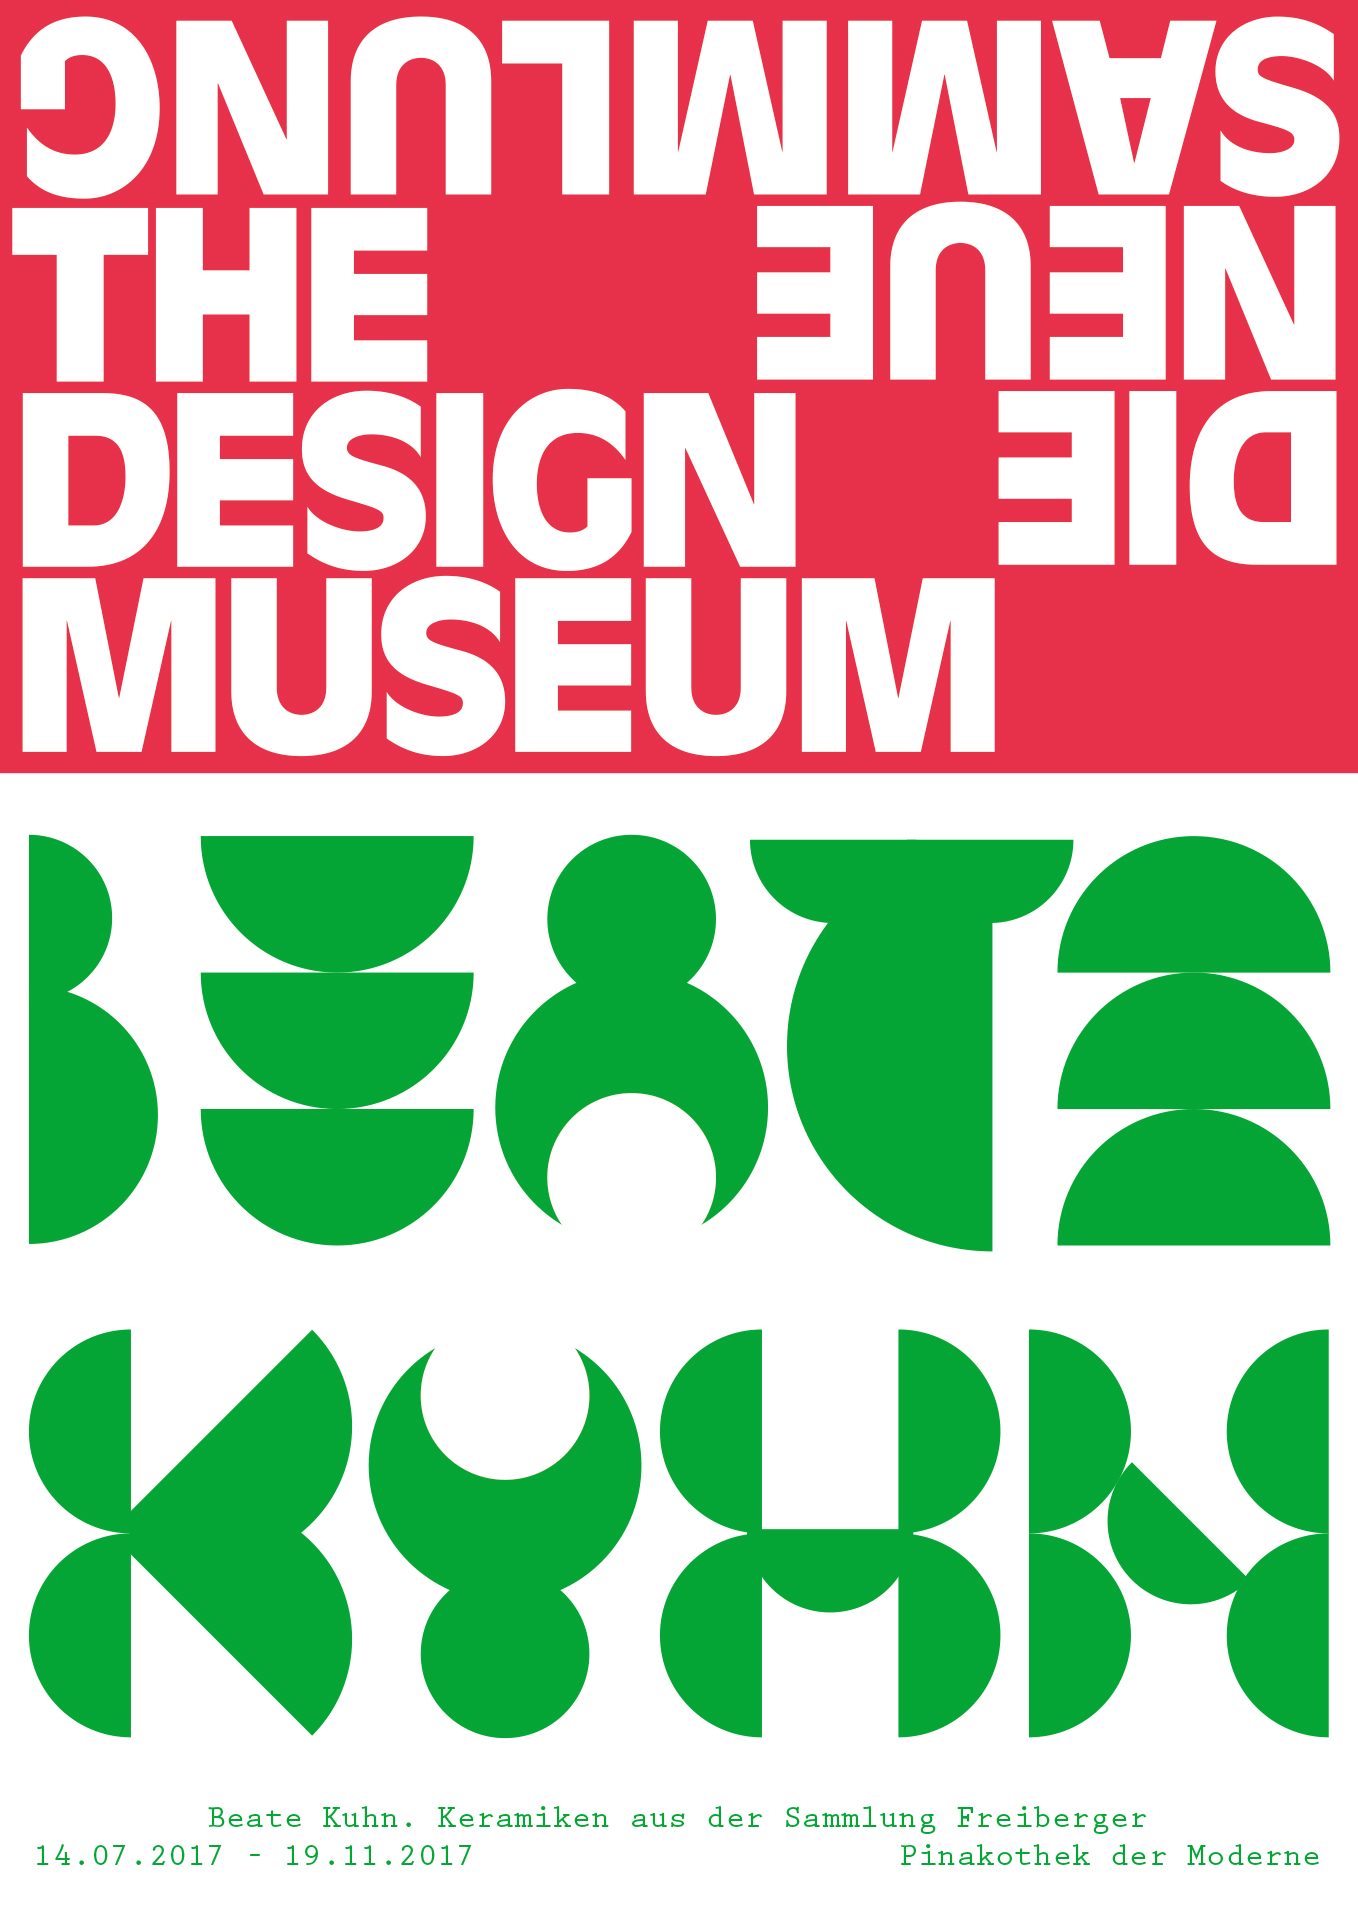 Exhibition poster. The red logo of Die Neue Sammlung in the upper third. Below it, the lettering Beate Kuhn composed of green circle segments. The title and duration of the exhibition at the bottom.